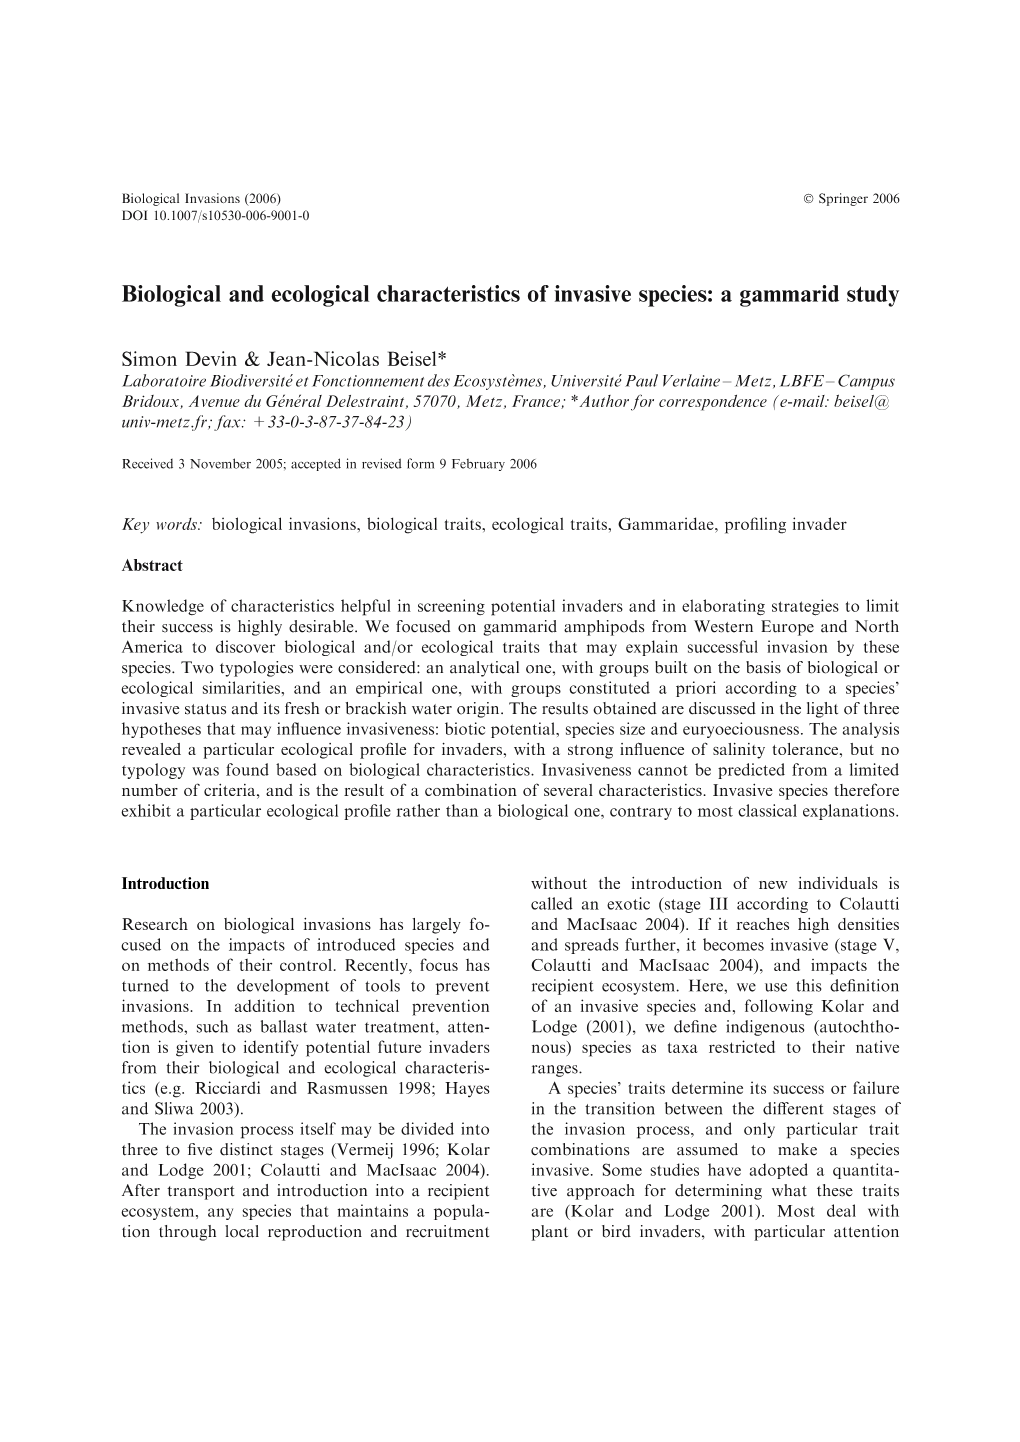 Biological and Ecological Characteristics of Invasive Species: a Gammarid Study